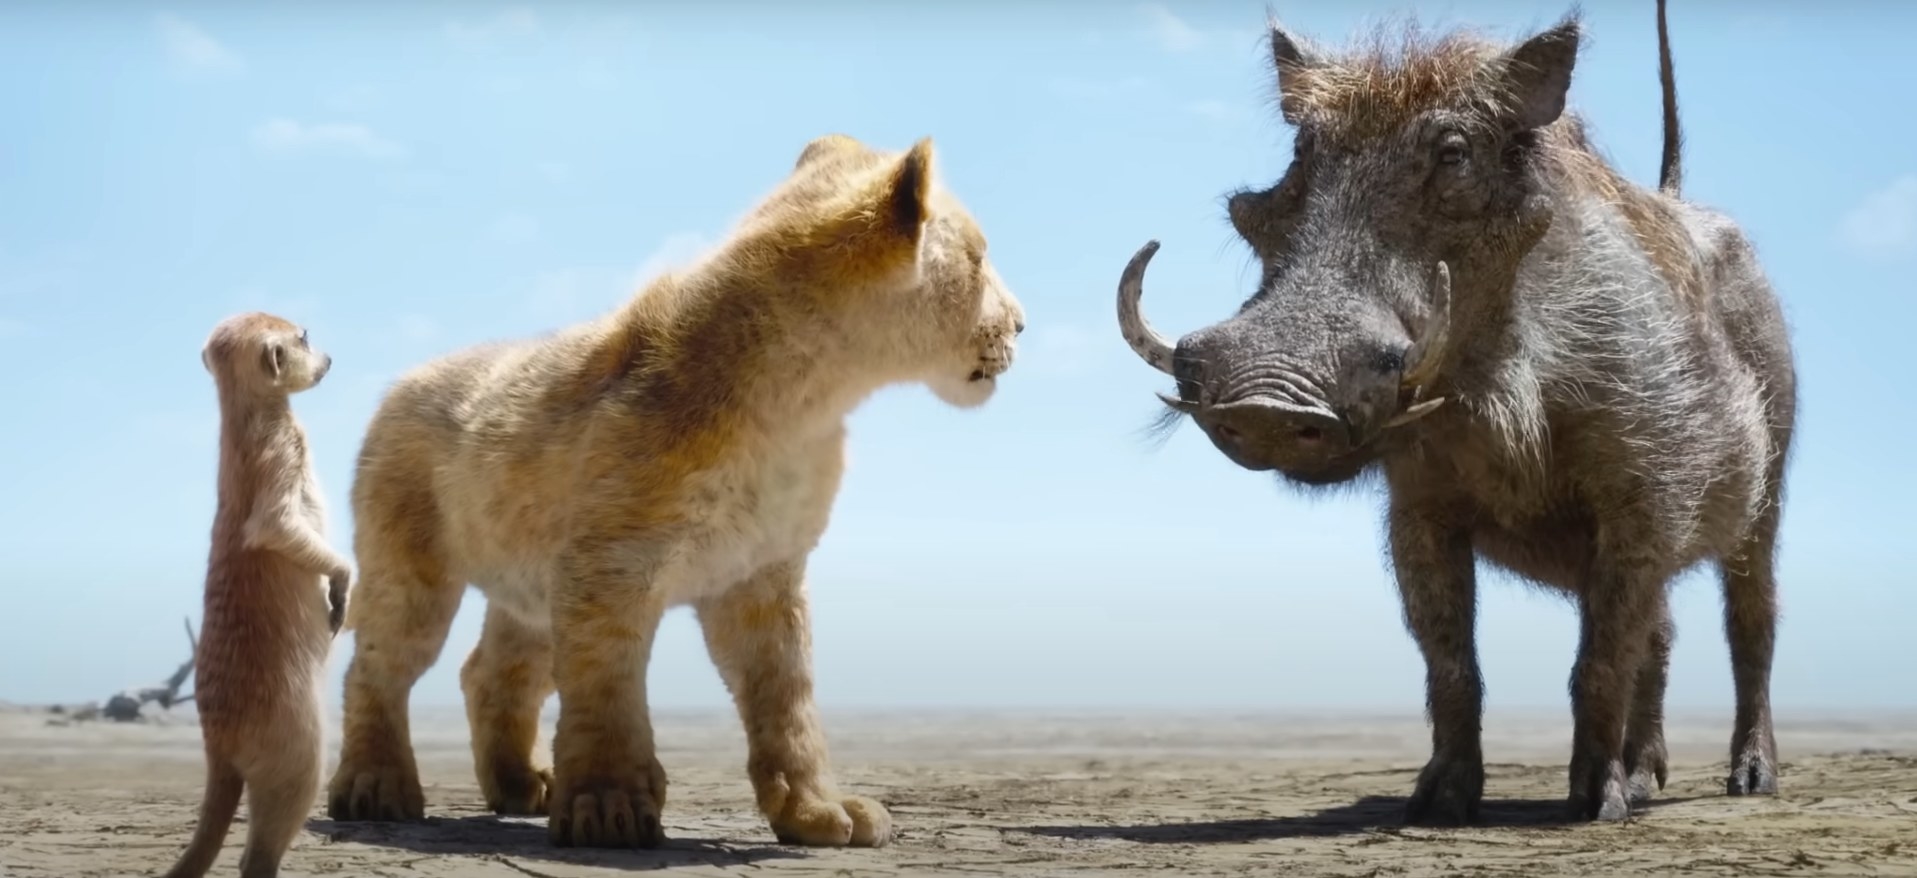 Animated characters Simba, Timon, and Pumbaa from The Lion King in a still from the film